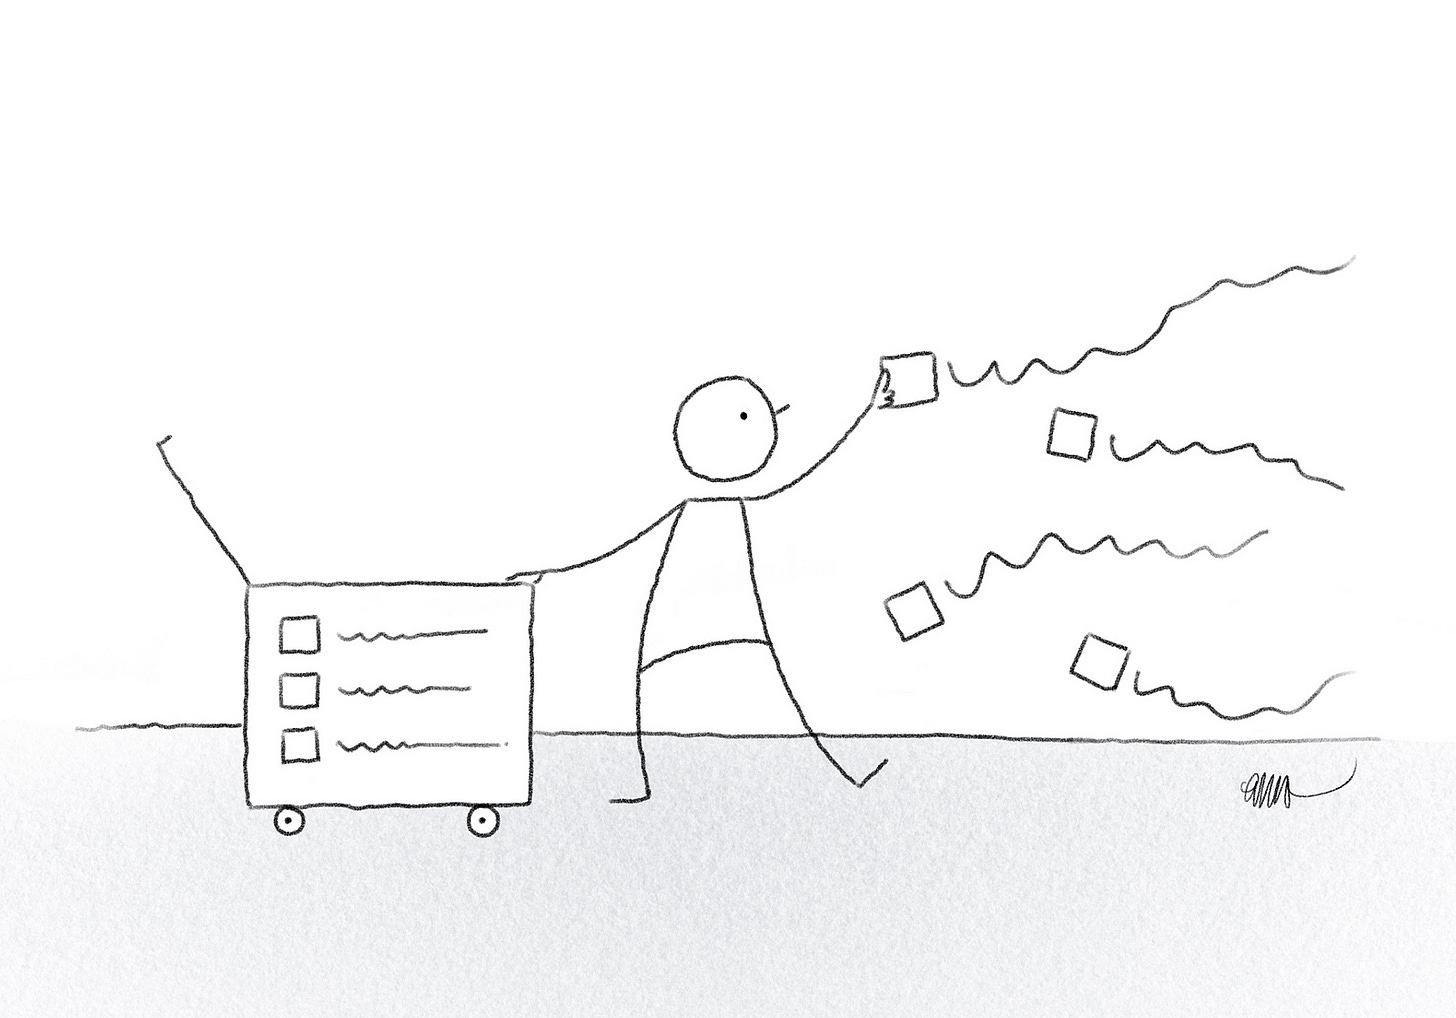 Cartoon line drawing showing a person reaching for tasks, which are represented by small boxes with a trailing wiggly line. The person has a trolley with an open lid next to them, and we can see three tasks neatly aligned inside.